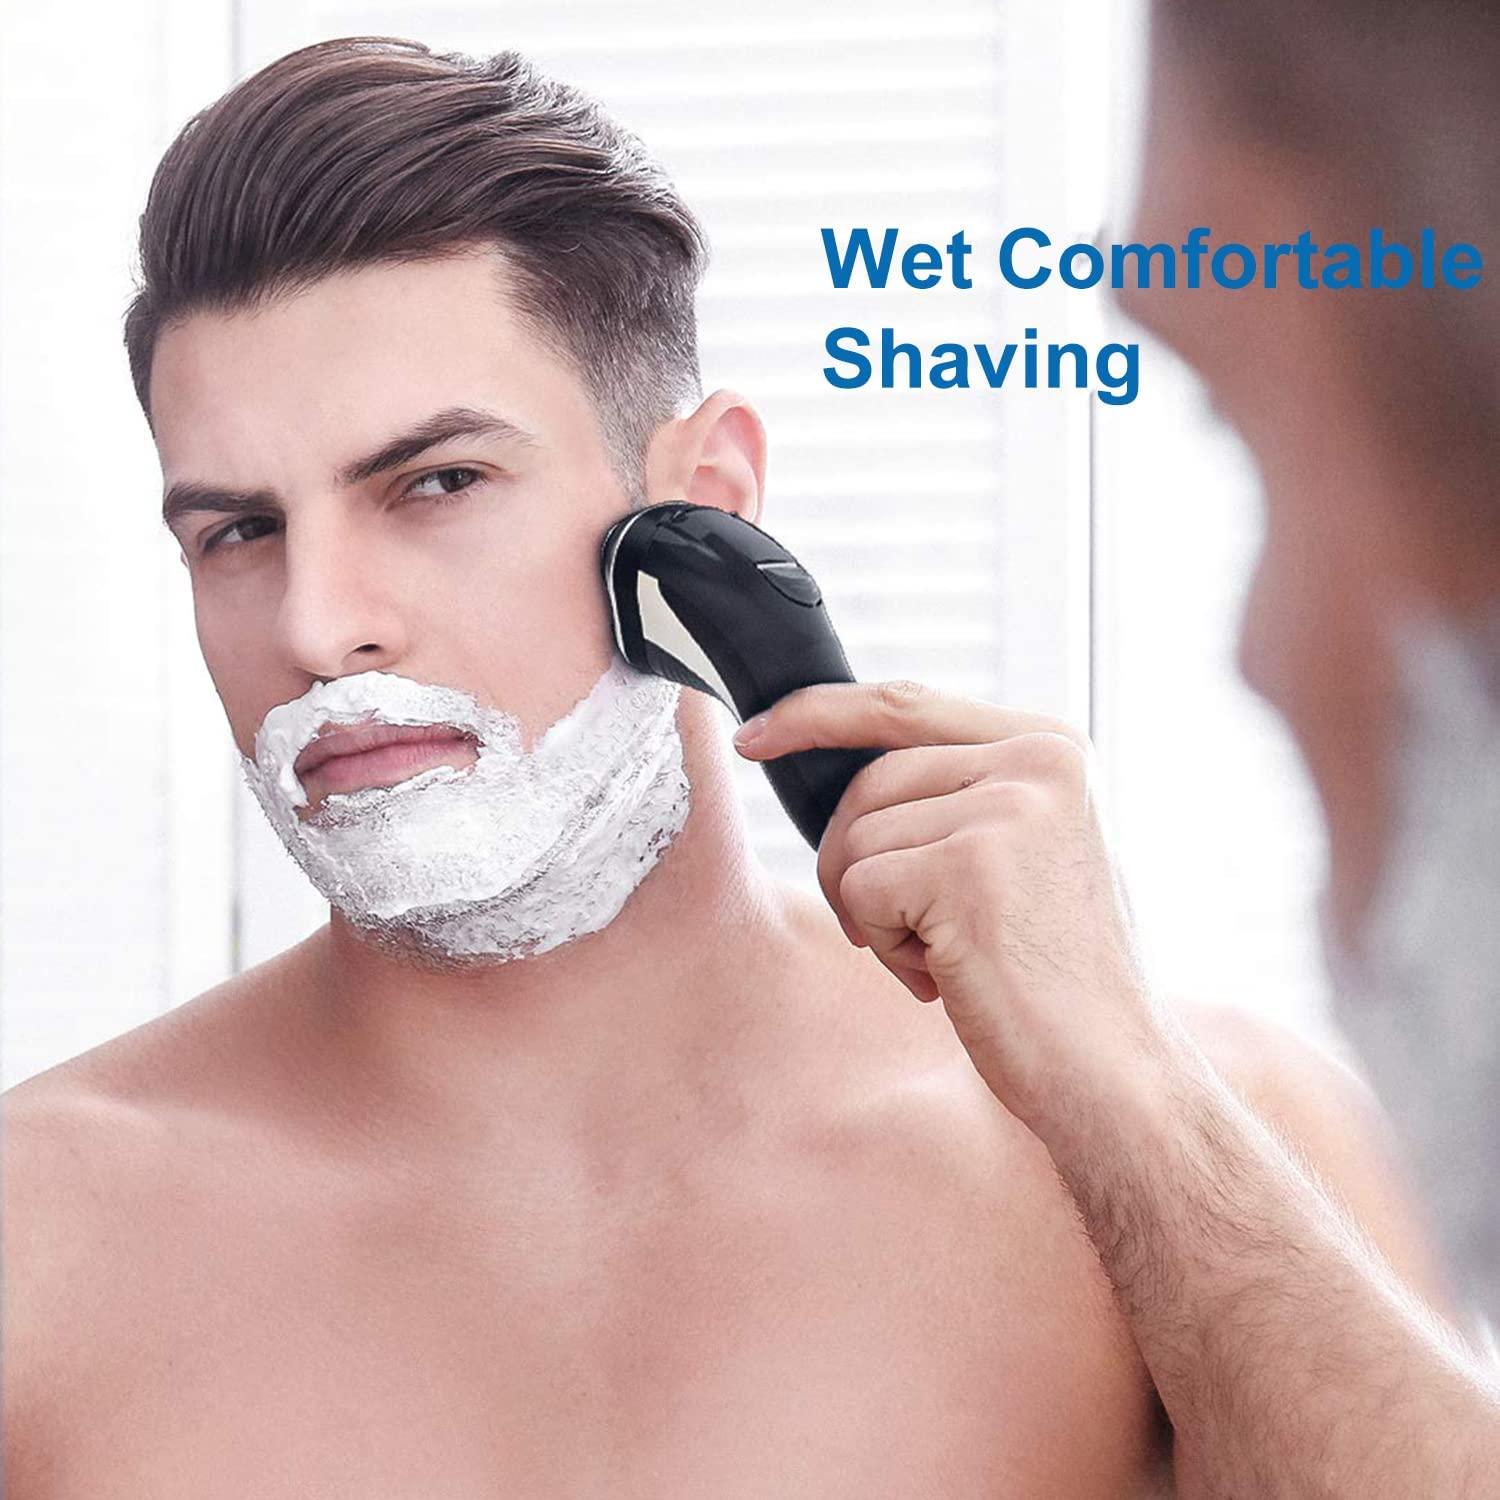 Philips Norelco SH30/52 Shaver series 3000 Shaving Heads Compatible with  Philips Norelco Series 1000, 2000, 3000 Shavers and S738 Click & Style,  Lift & Cut 